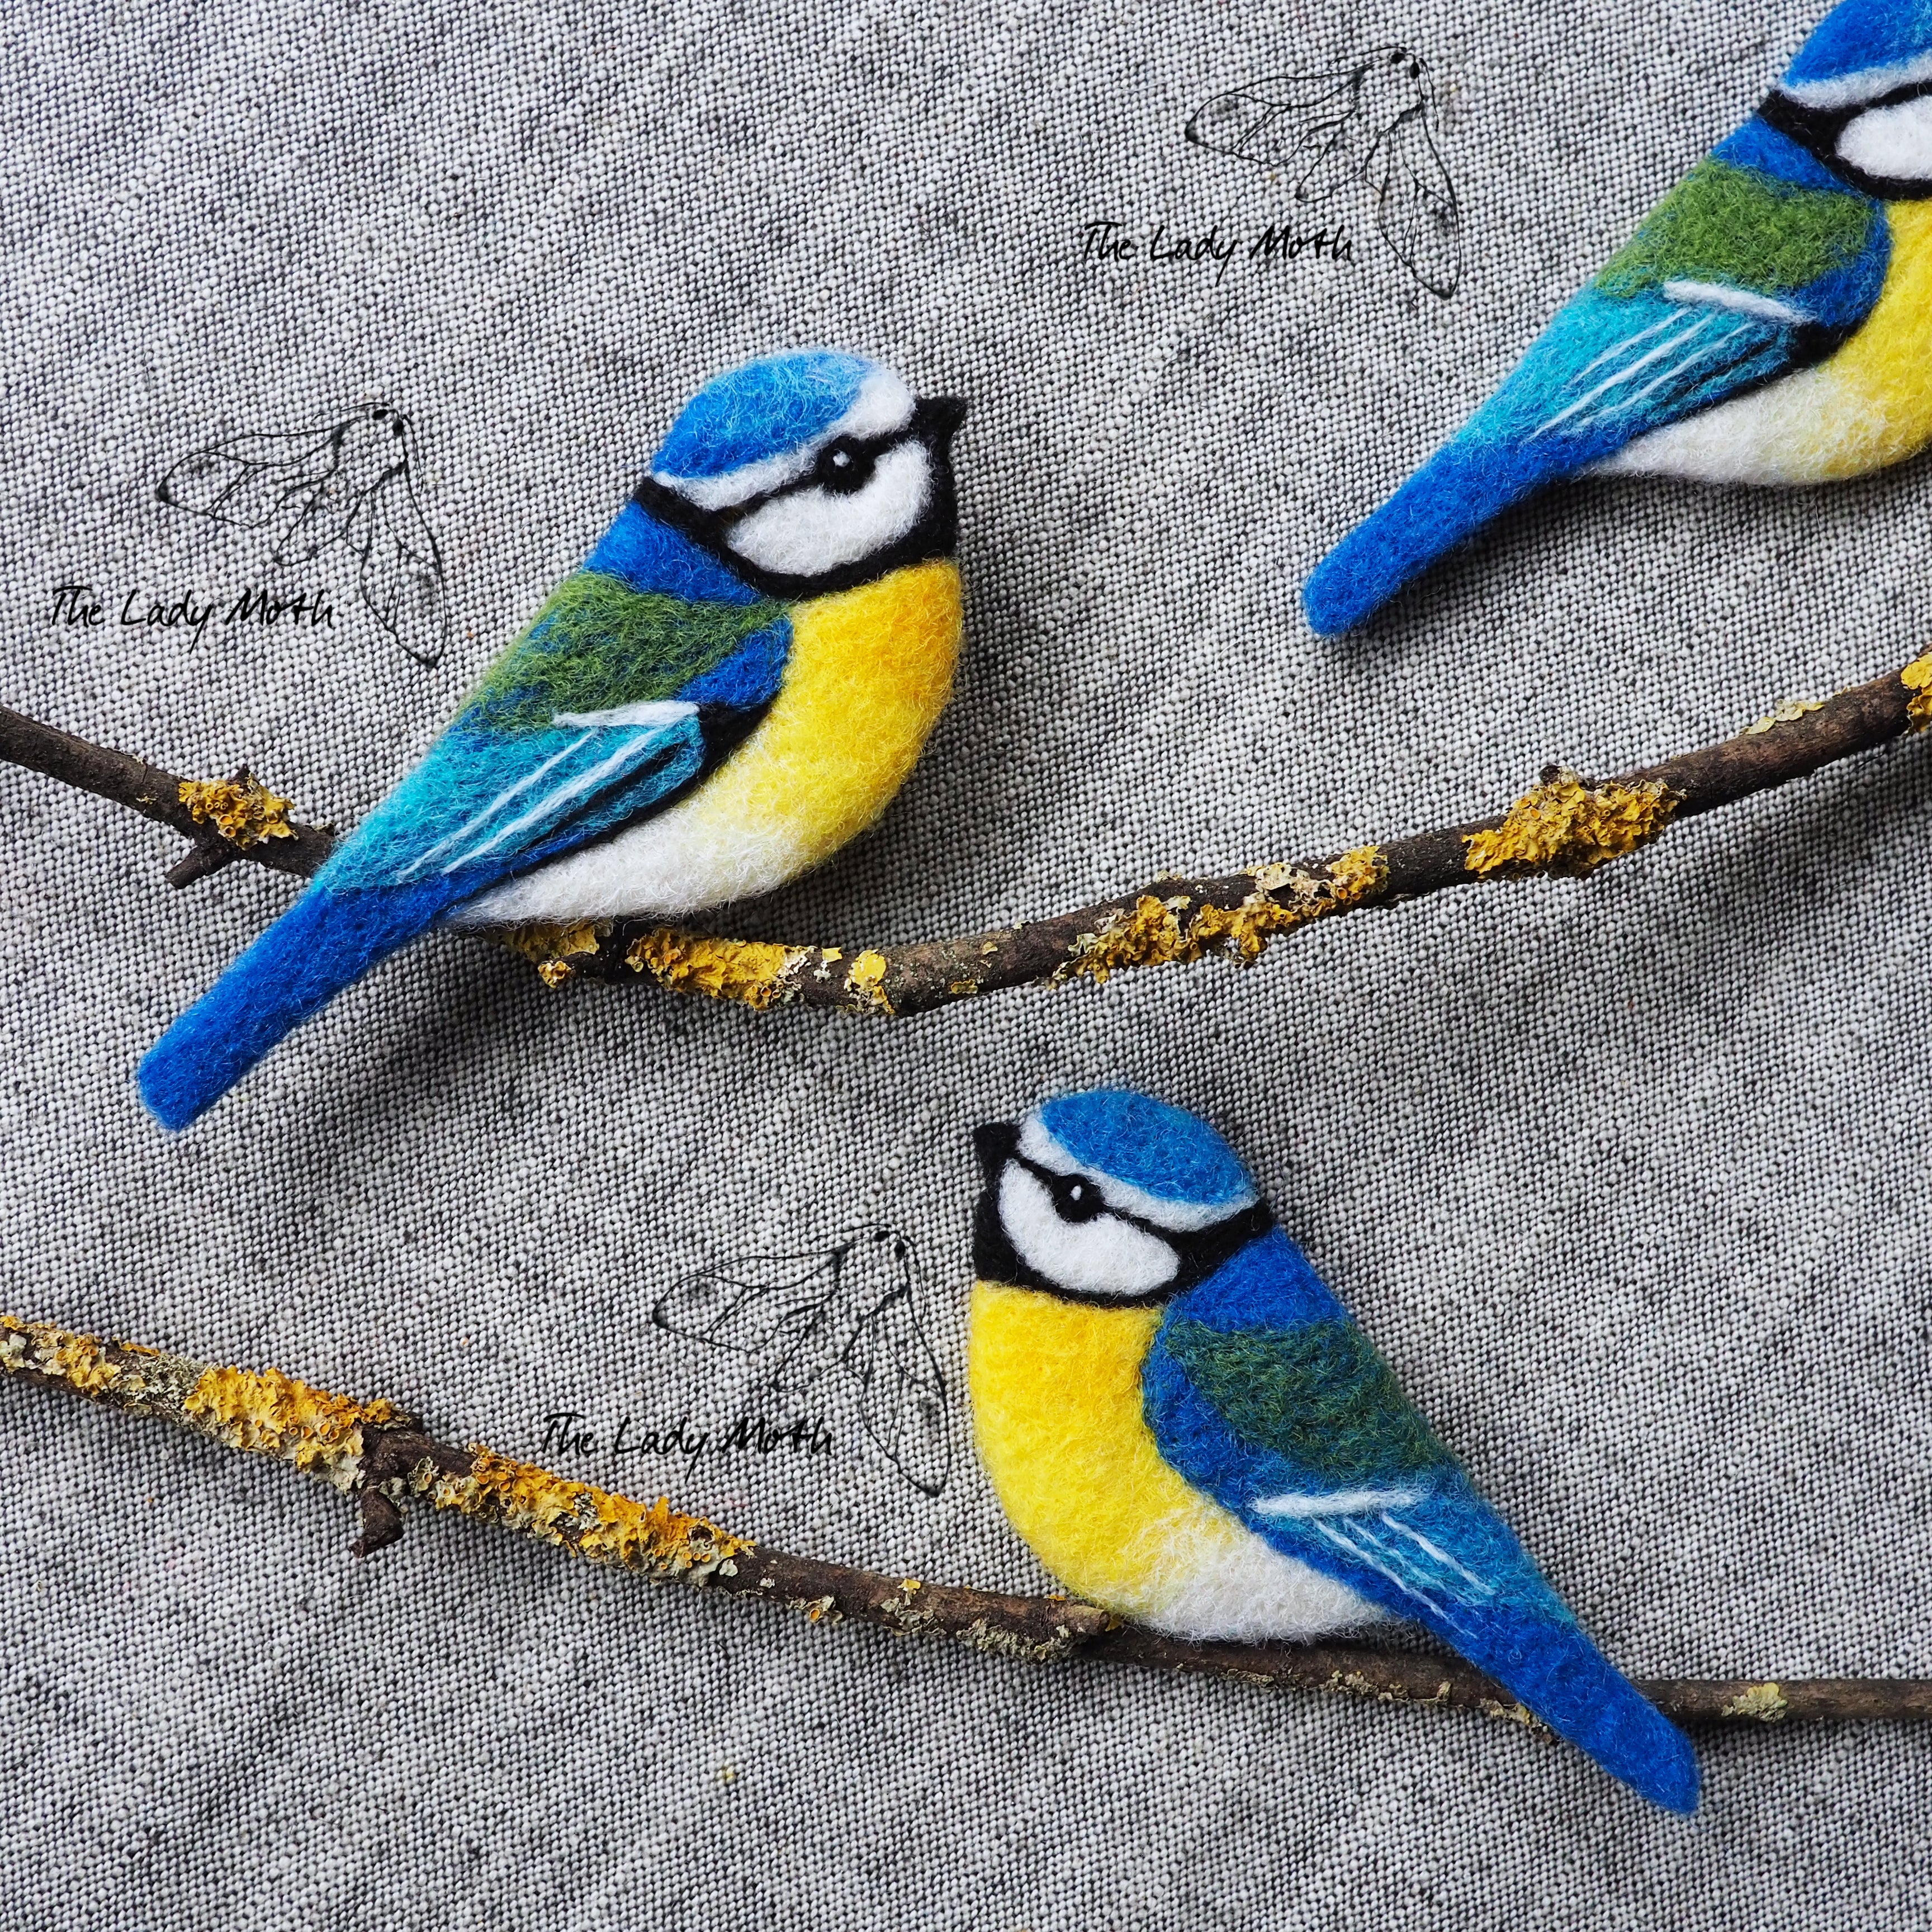 Online Video Tutorial - Needle Felted Blue Tit Brooch by The Lady Moth